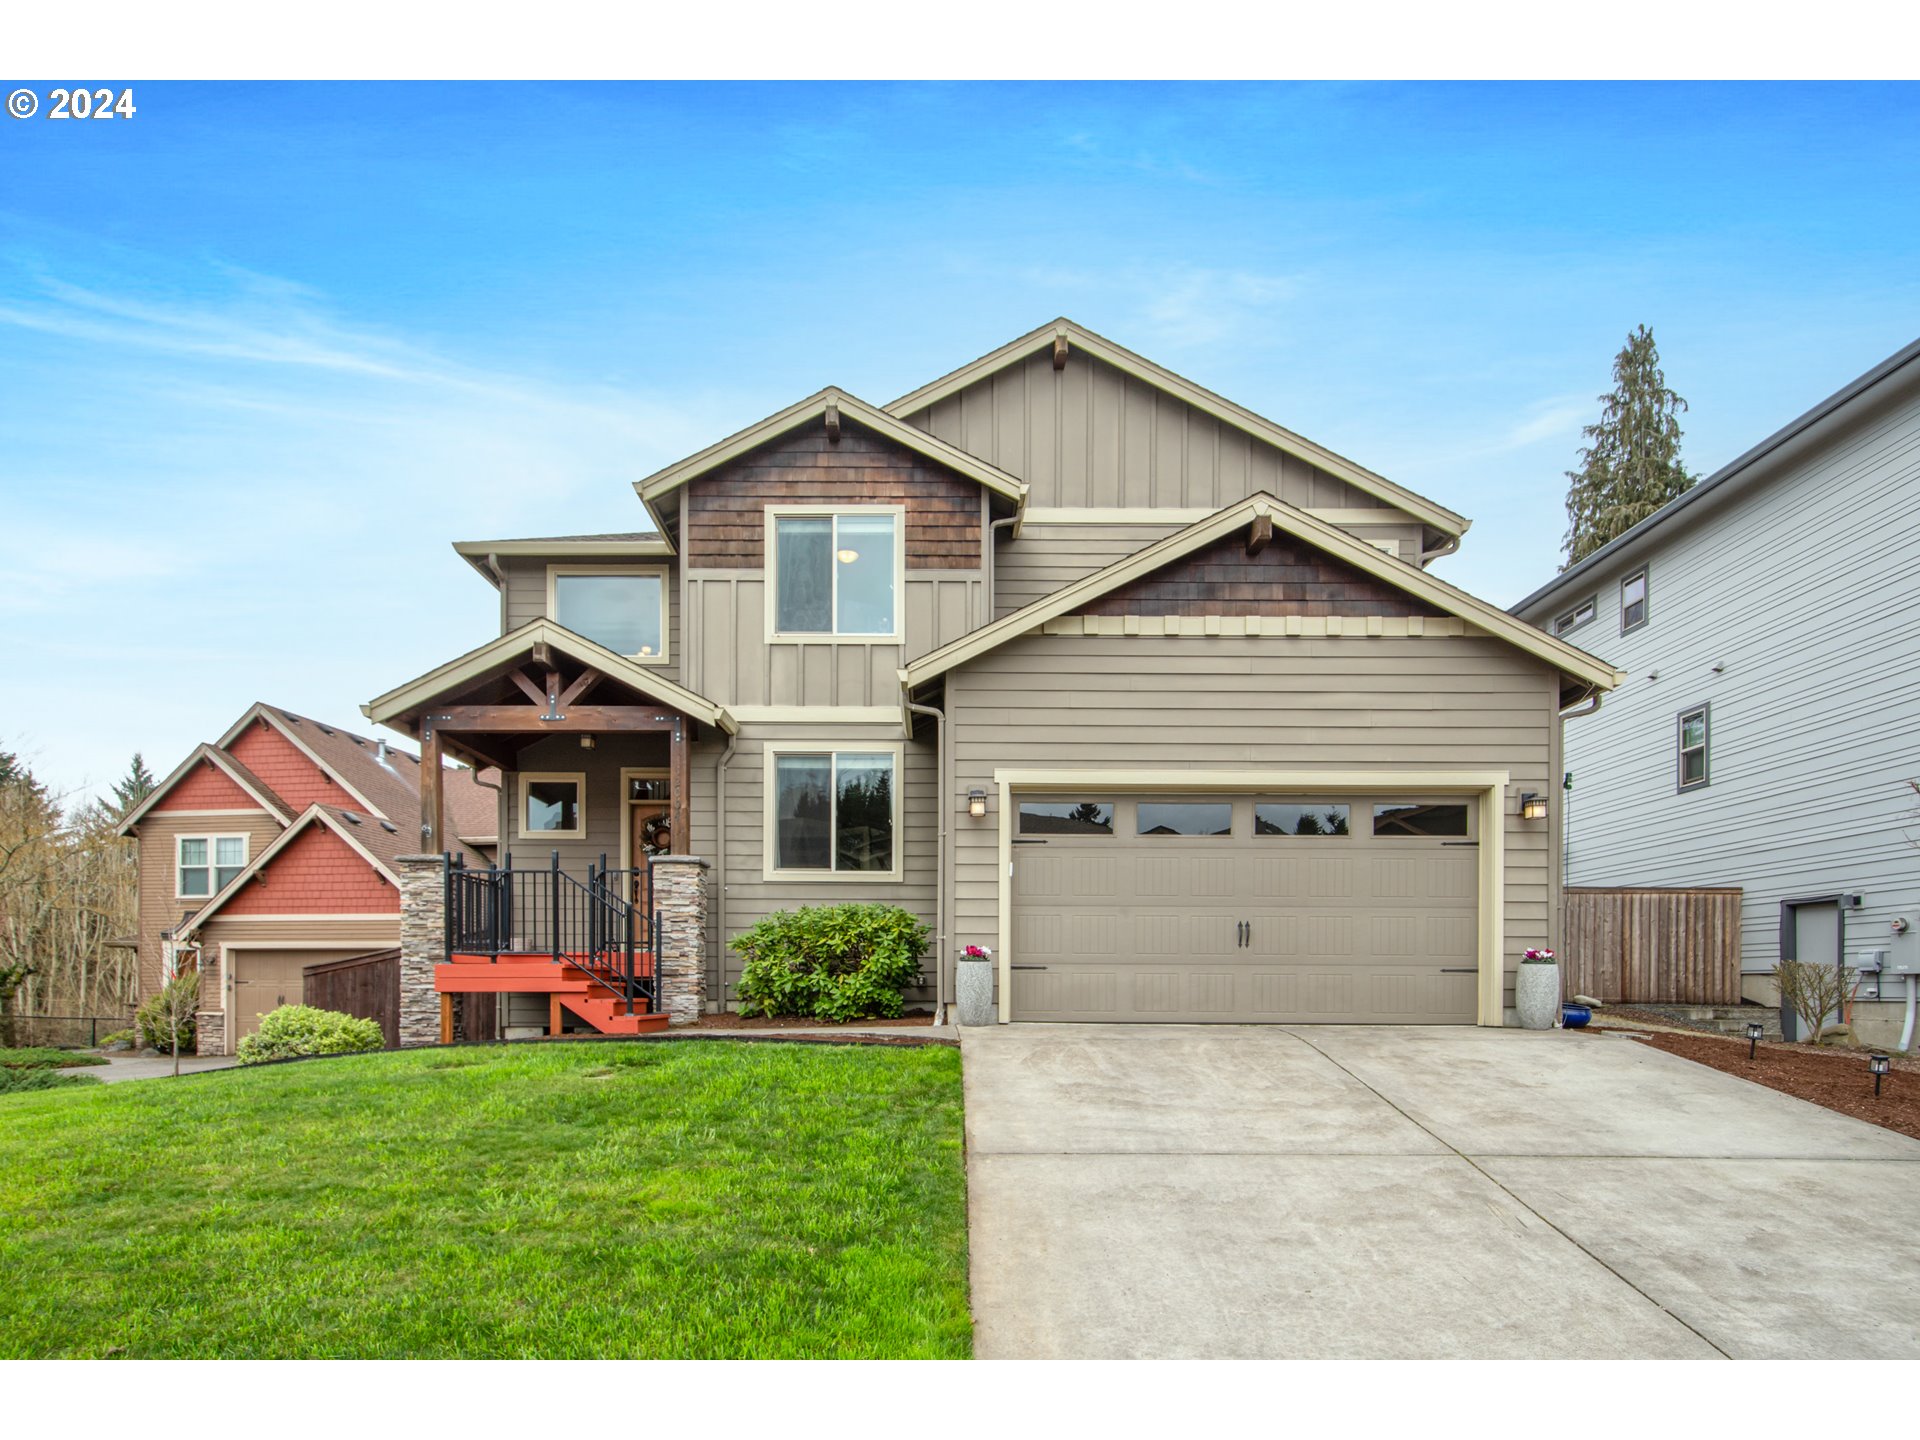 12004 NW 42ND AVE, Vancouver, WA 